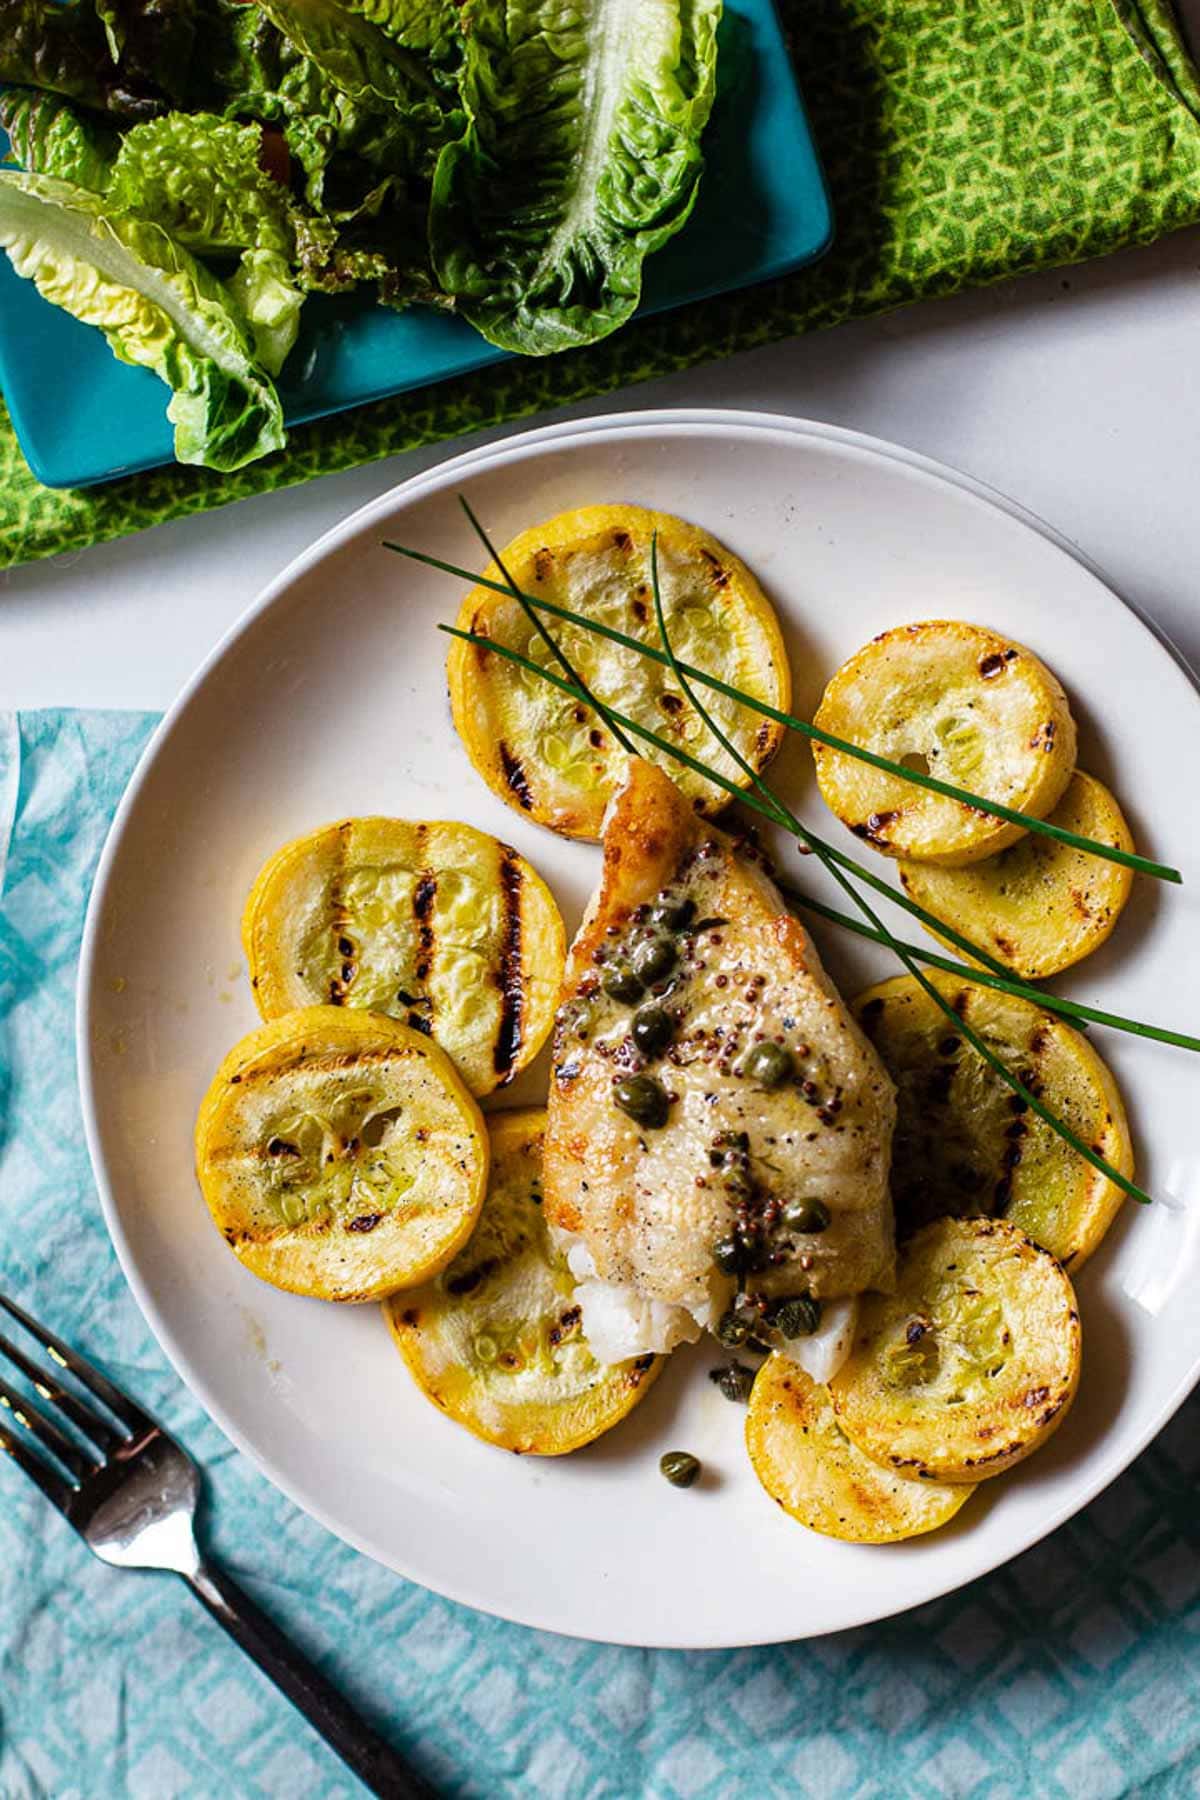 Pan fried cod served over grilled summer squash, garnished with chives and served with a side salad